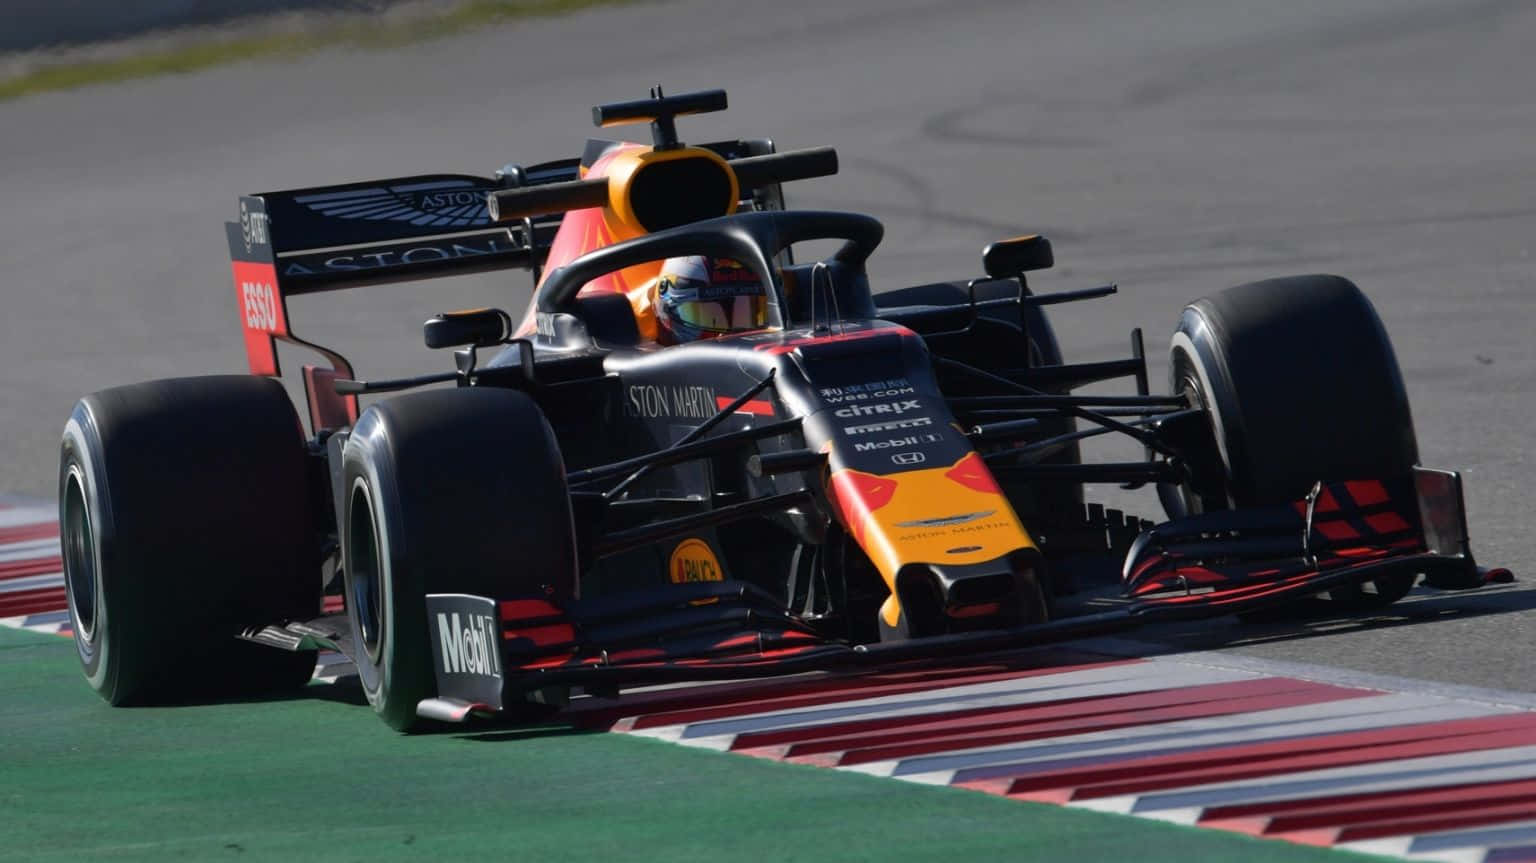 Max Verstappen racing in his Red Bull car during a Formula 1 event